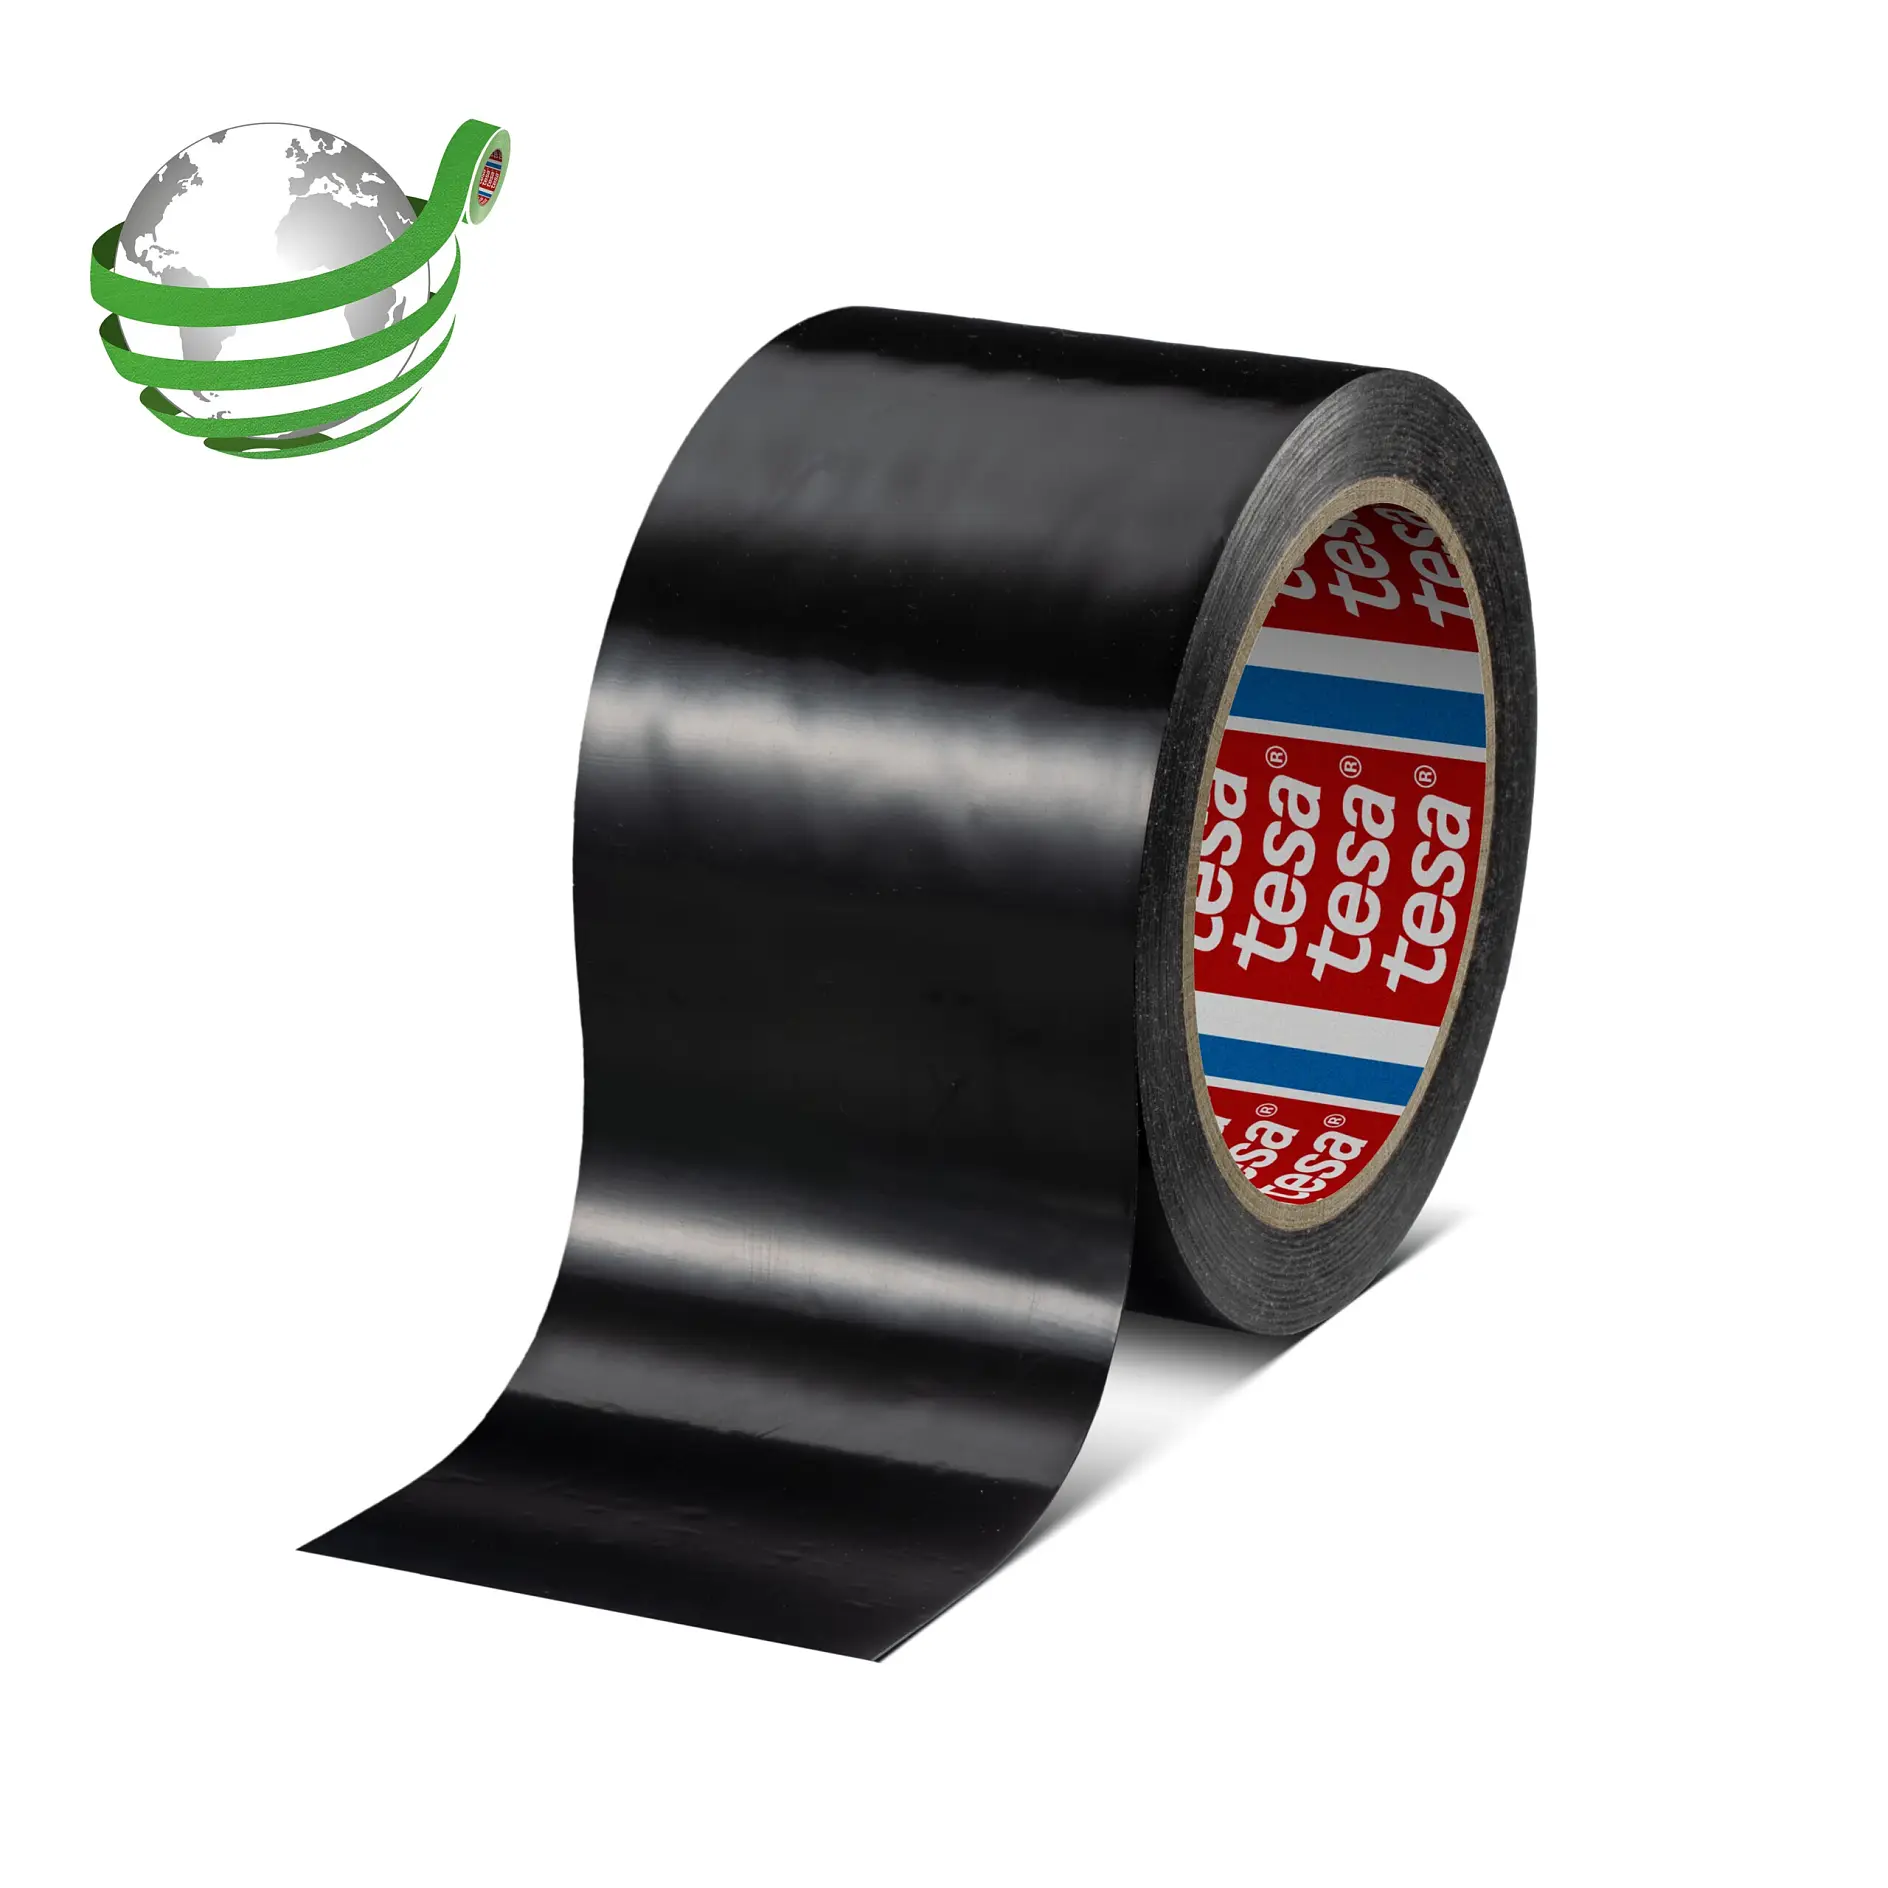 tesa-04648-repairing-tape-for-silage-cover-films-black-04648-00001-00-pr-with-marker